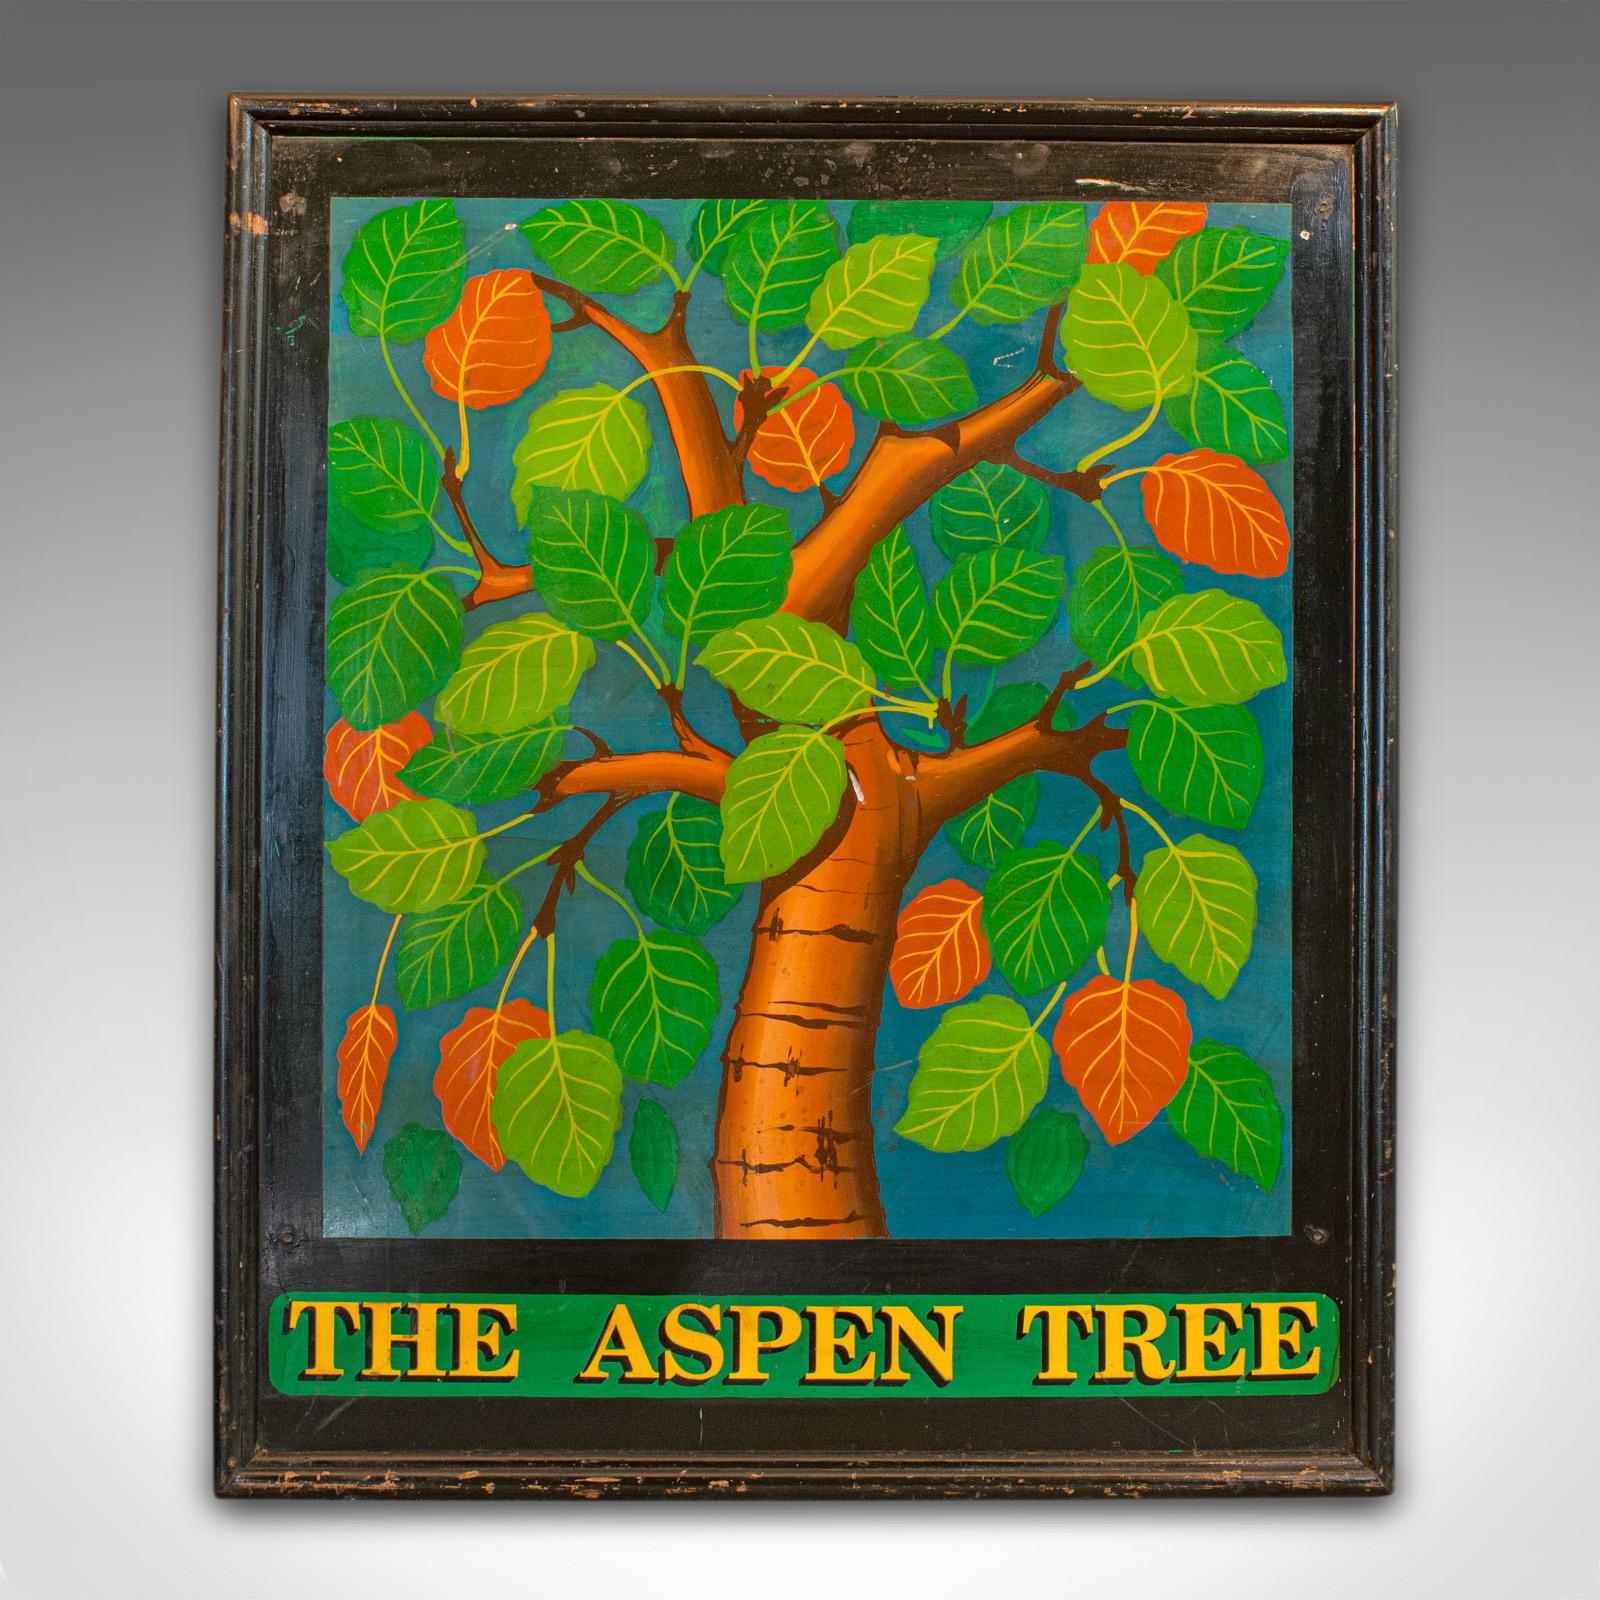 Our Stock # 18.6494

This is a vintage pub sign. An English, pine single-sided sign, hand painted with the name 'The Aspen Tree', dating to the mid-20th century, circa 1950.

Vibrant color sets this sign off wonderfully
Displays a desirable